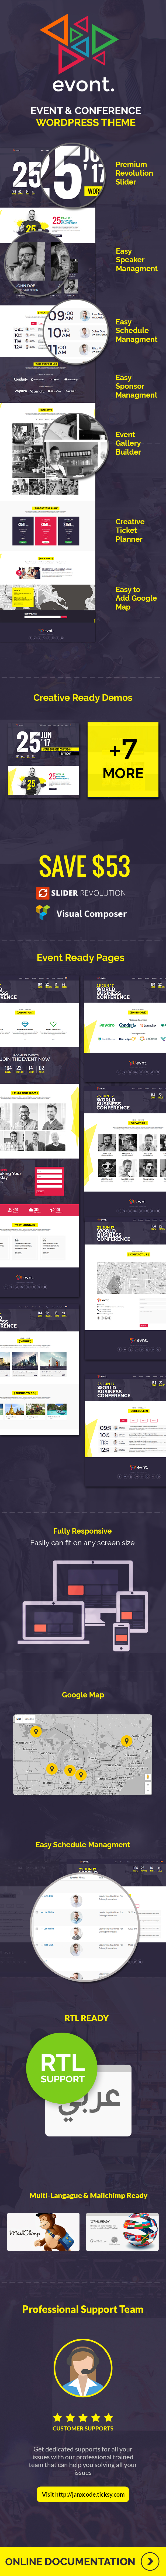 Evont - Events and Meetings WordPress Theme - 2